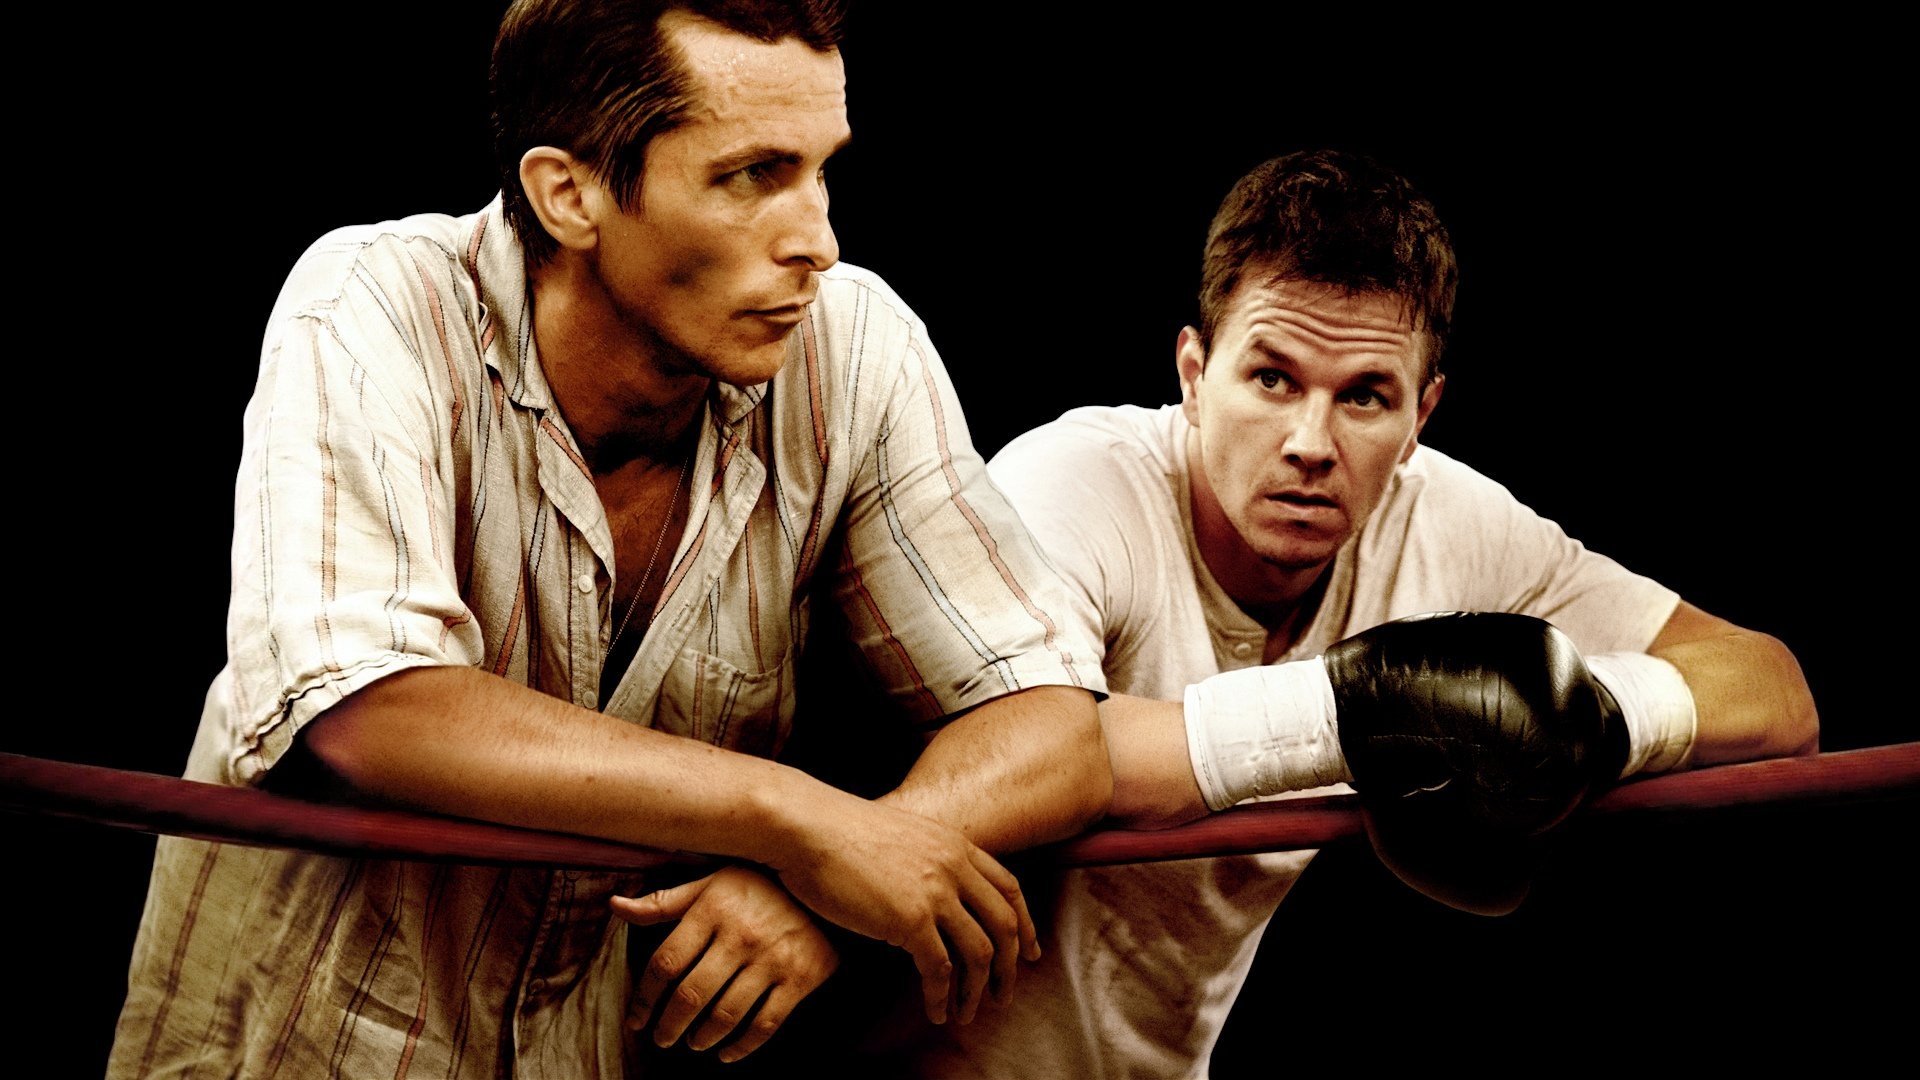 The Fighter, Movie wallpapers, Boxing drama, Fighter's journey, 1920x1080 Full HD Desktop